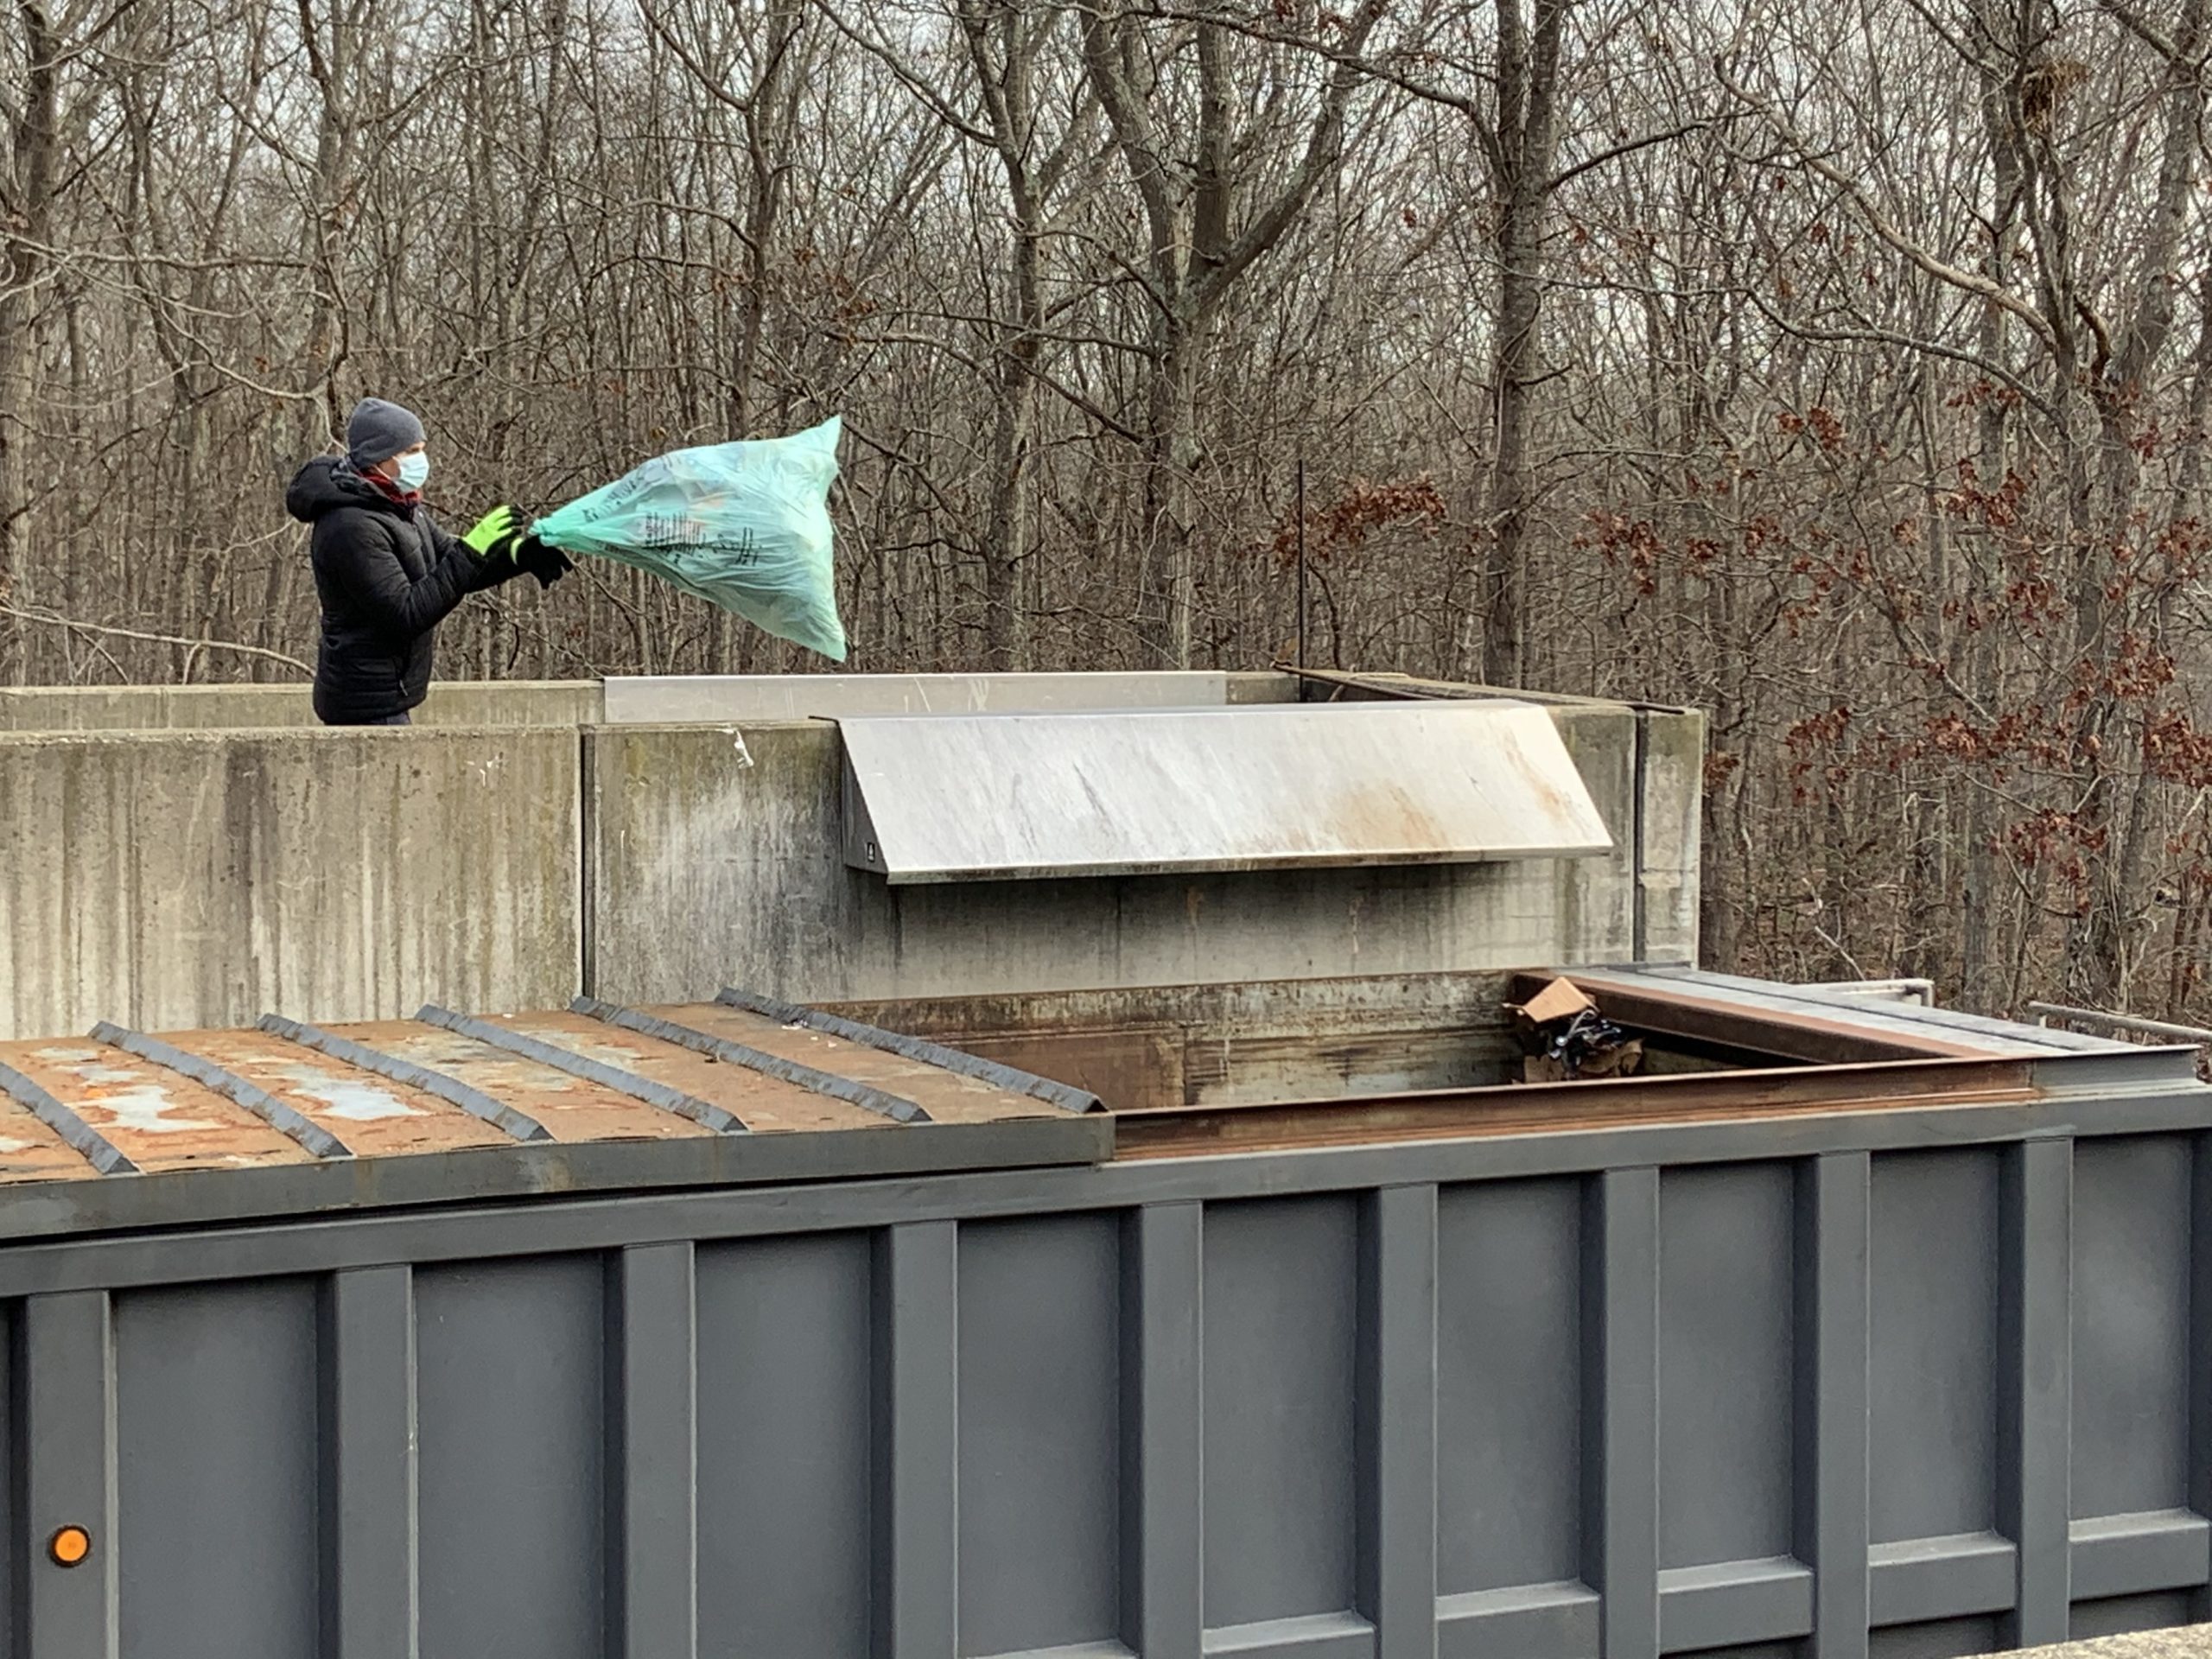 A self-hauler tosses a green bag full of nonrecyclable garbage at the Sag Harbor transfer station. STEPHEN J. KOTZ